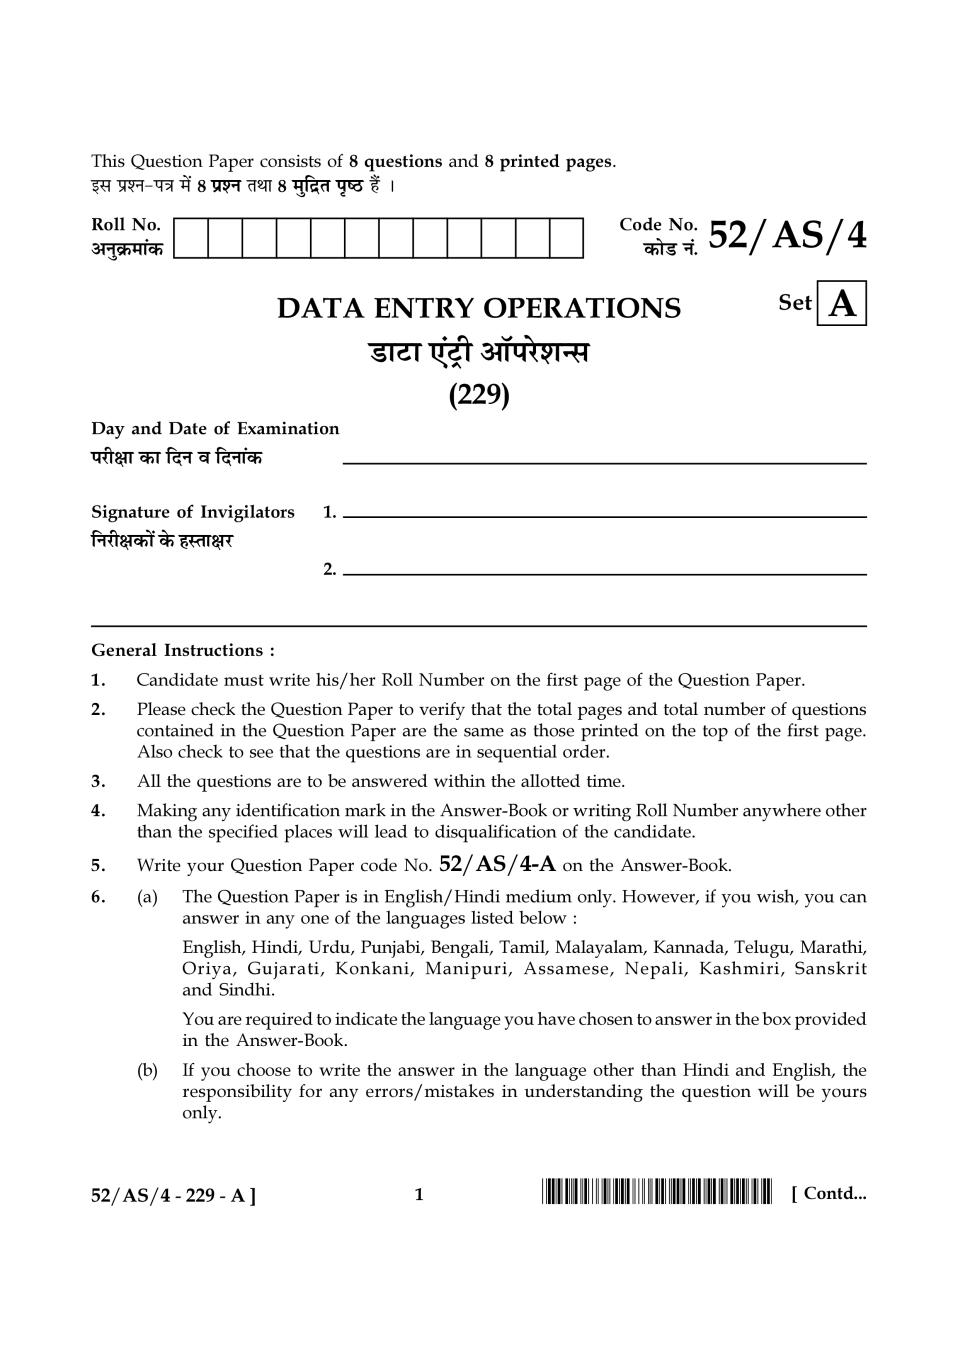 NIOS Class 10 Question Paper Apr 2016 - Data Entry Operations - Page 1